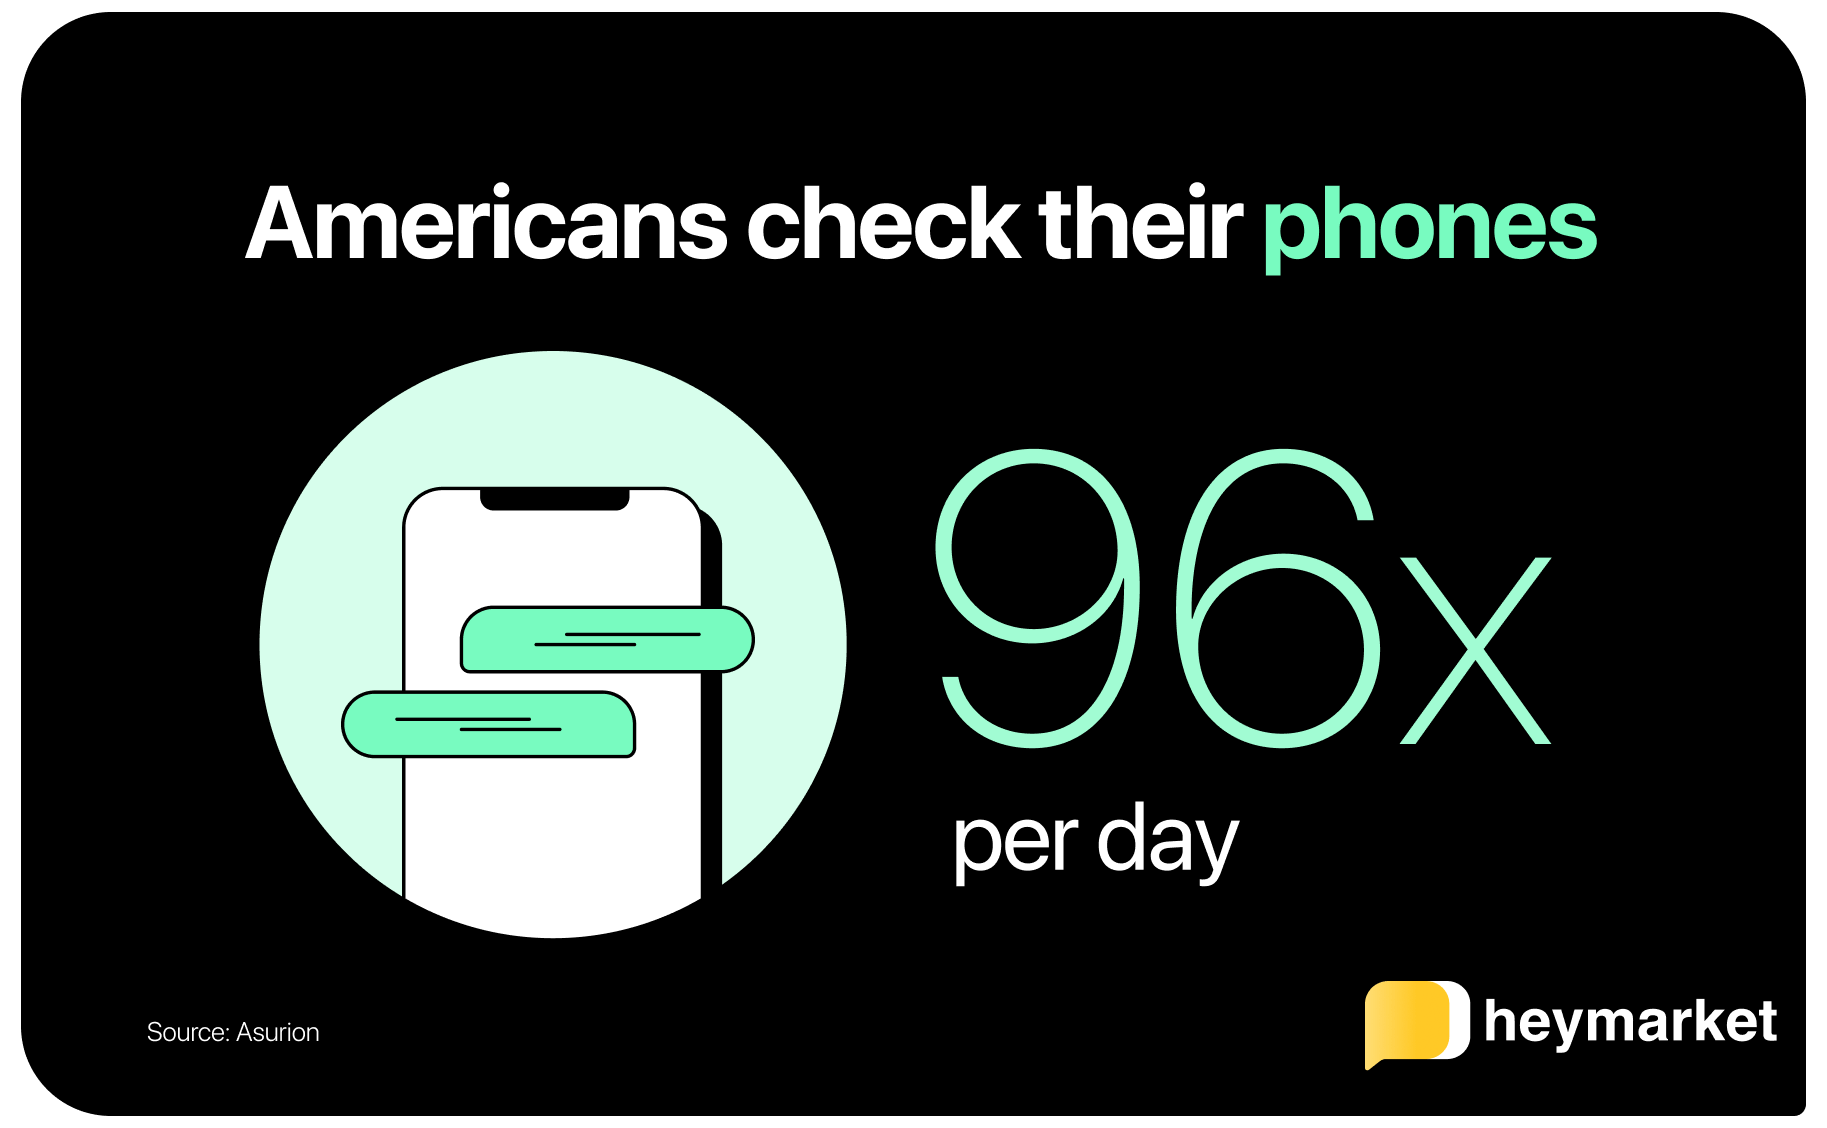 Americans check their cell phones 96 times per day